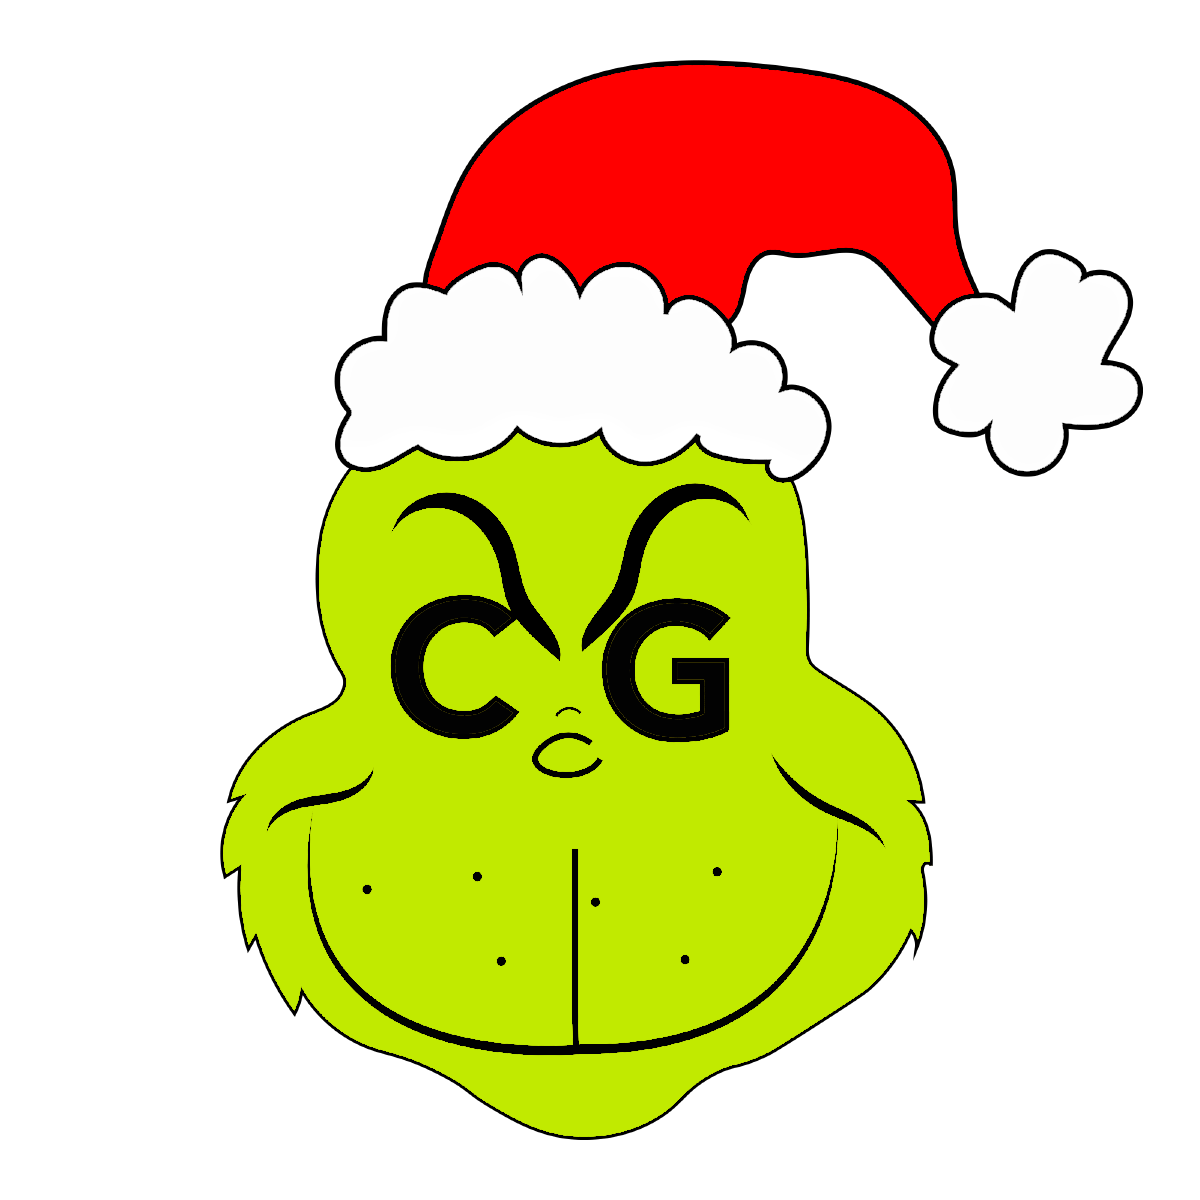 The Grinch Christmas Sticker by CG Labs for iOS & Android | GIPHY